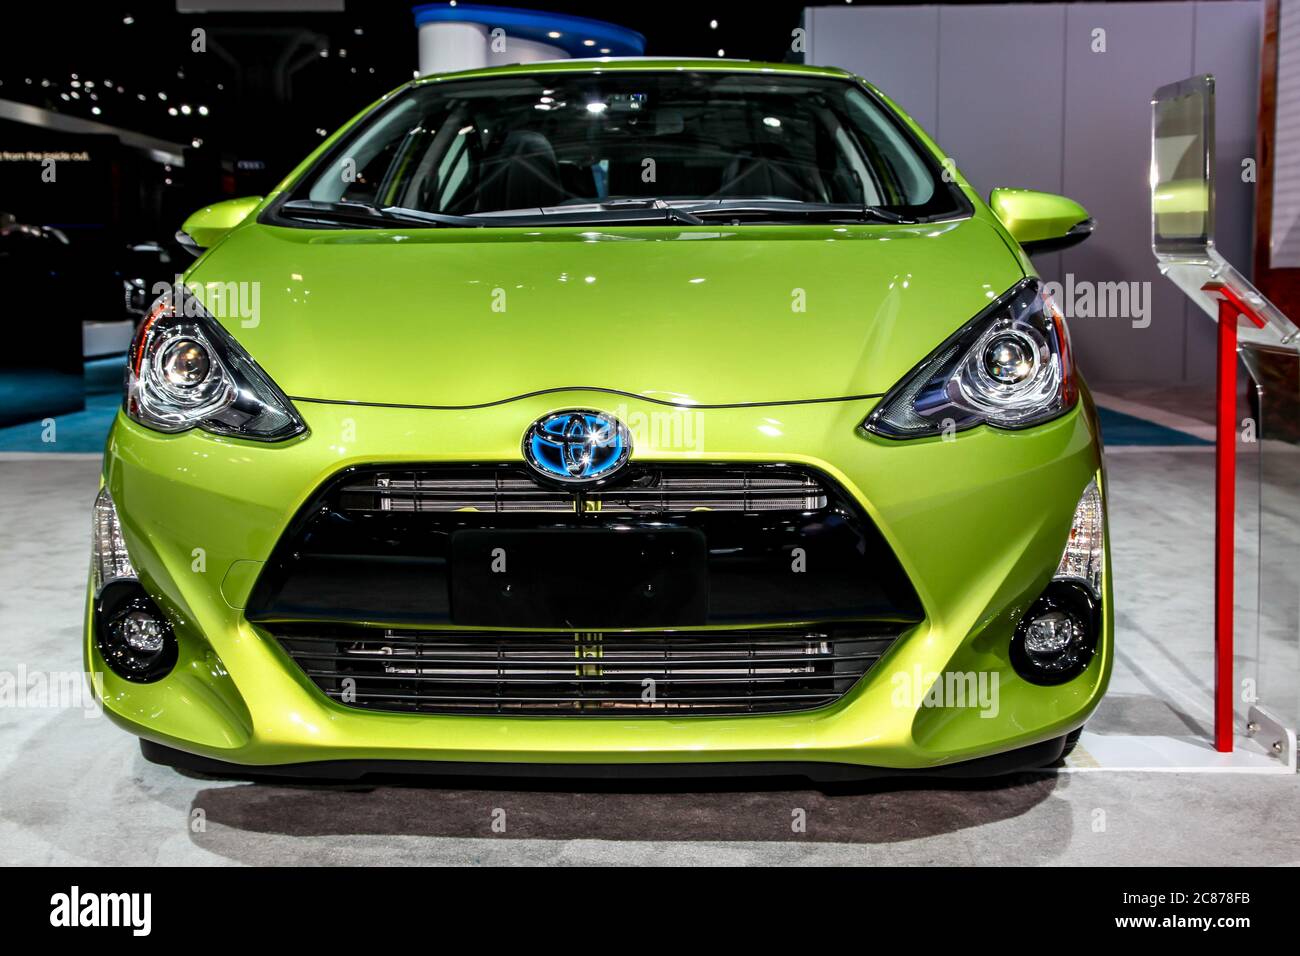 NEW YORK - March 23: A Toyota Prius c exhibit at the 2016 New York International Auto Show during Press day Stock Photo